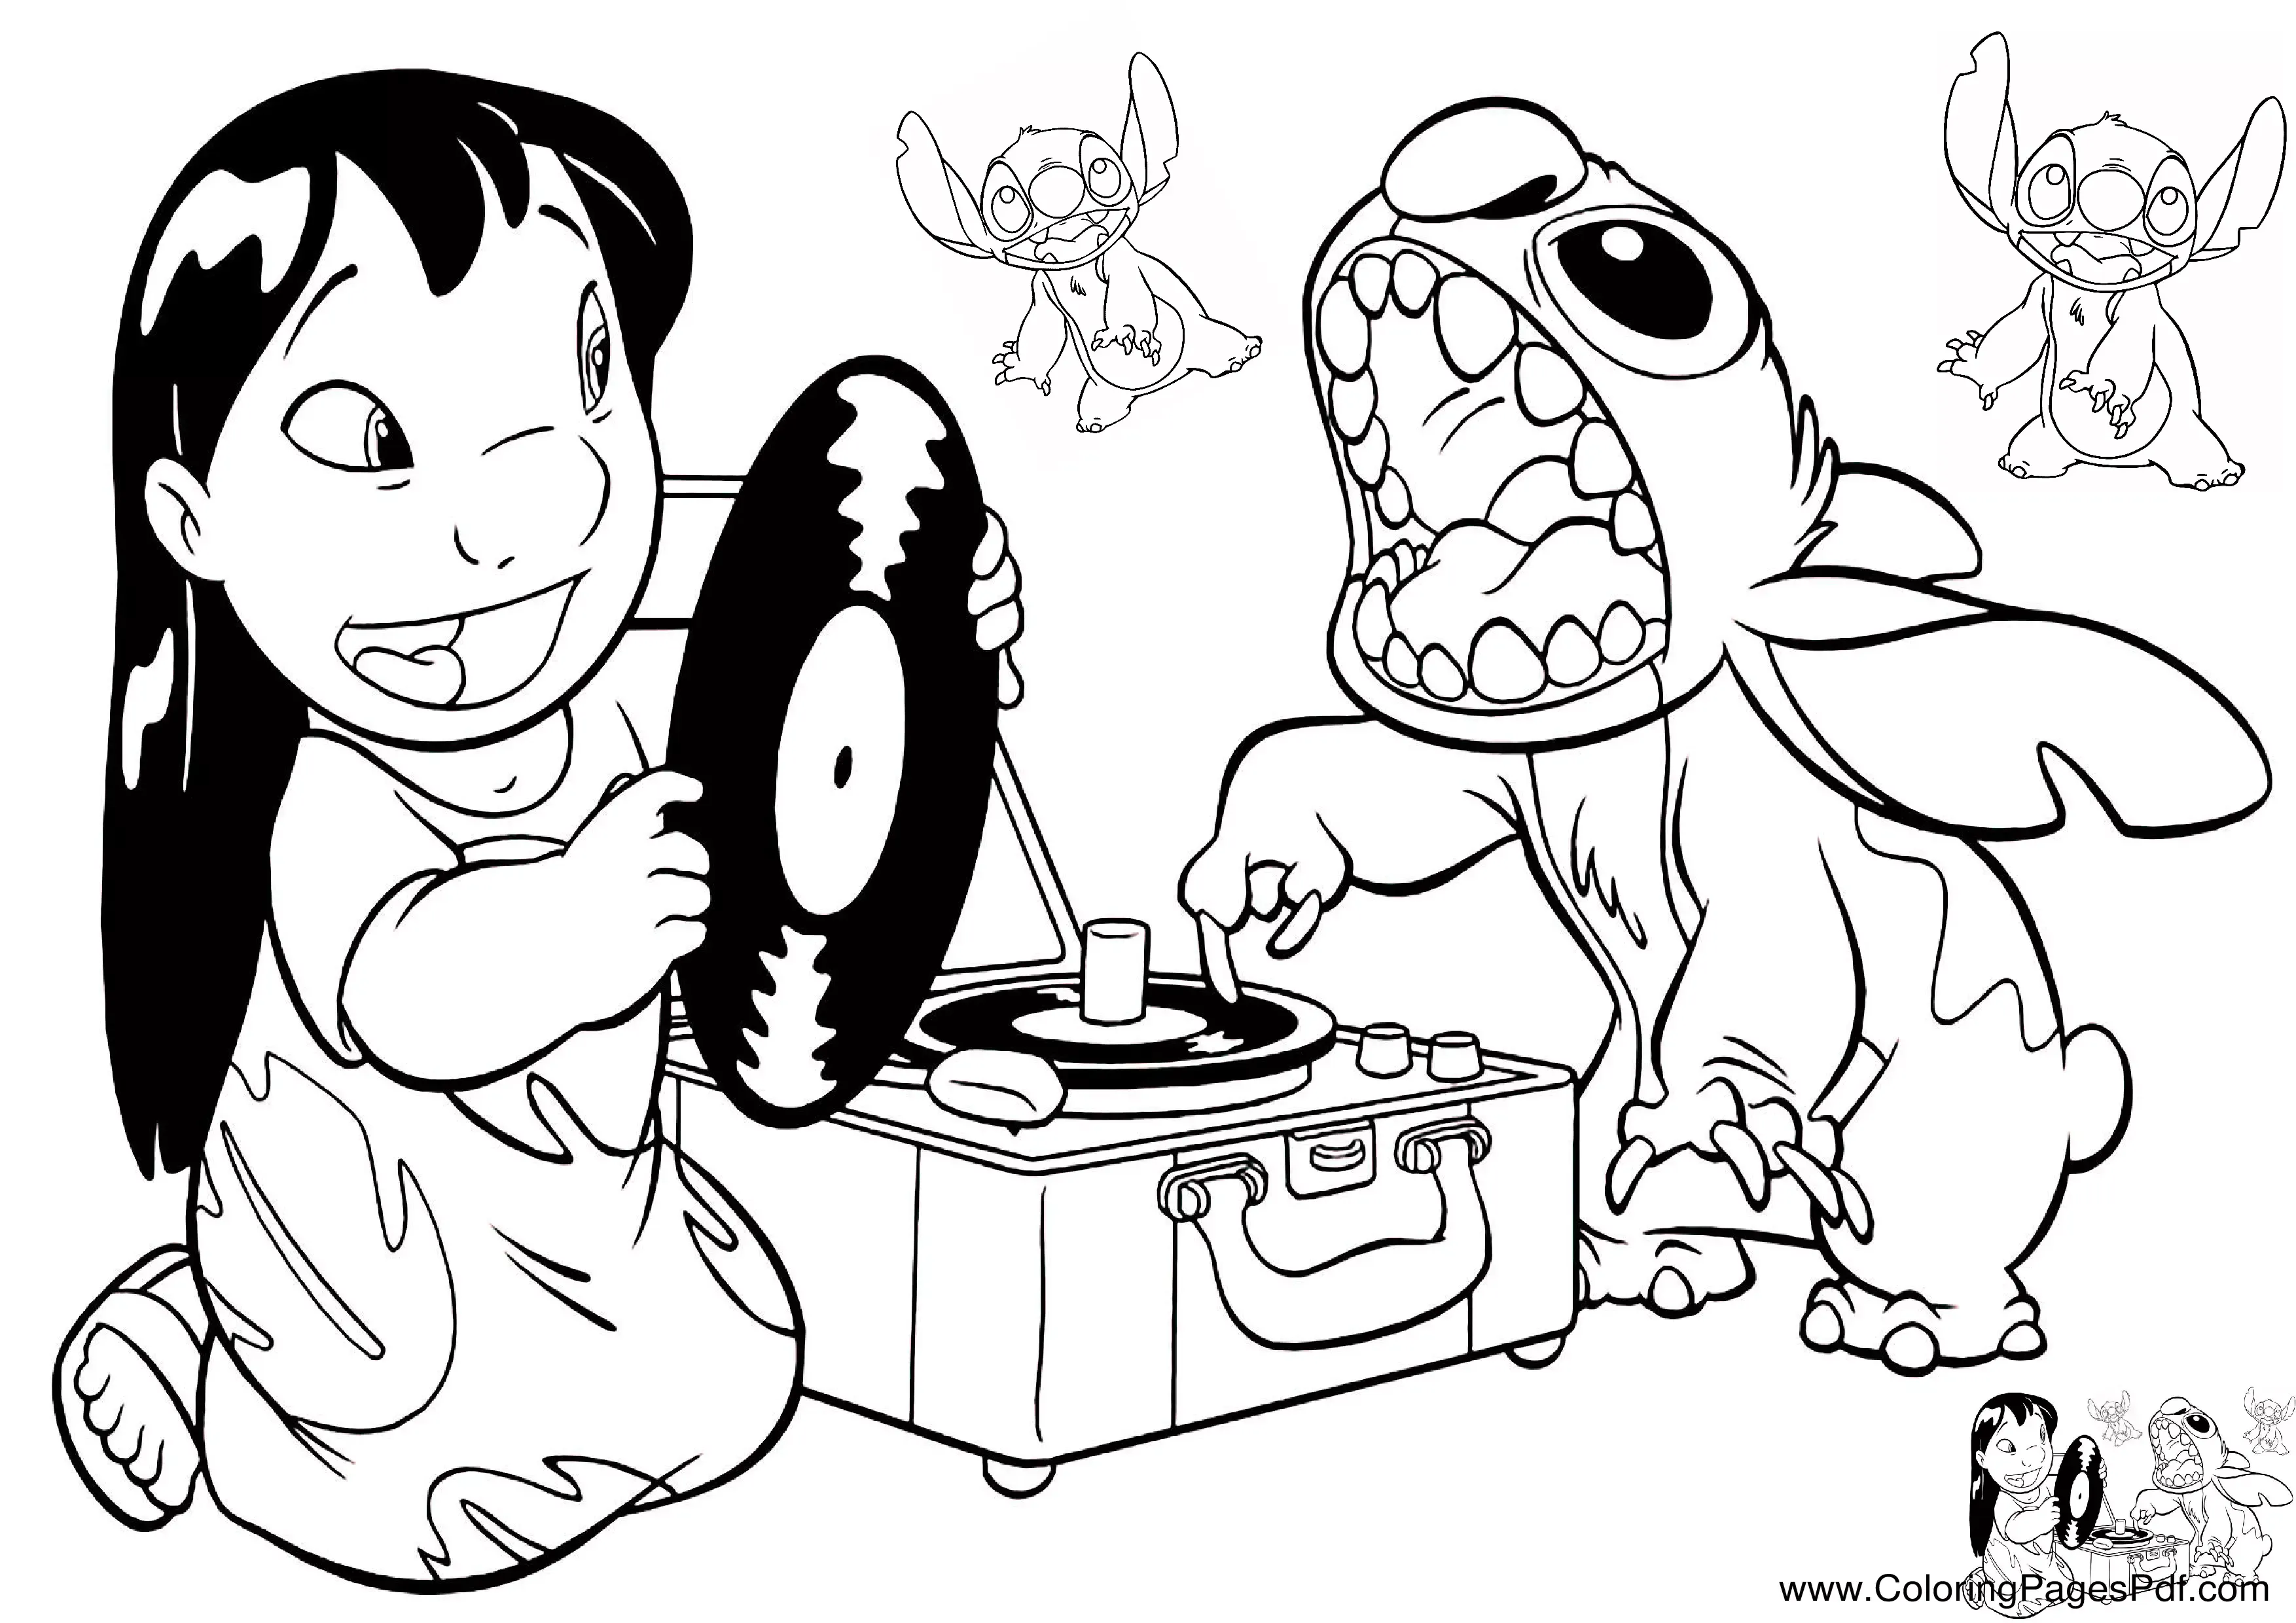 Lilo and stitch coloring pages pdf